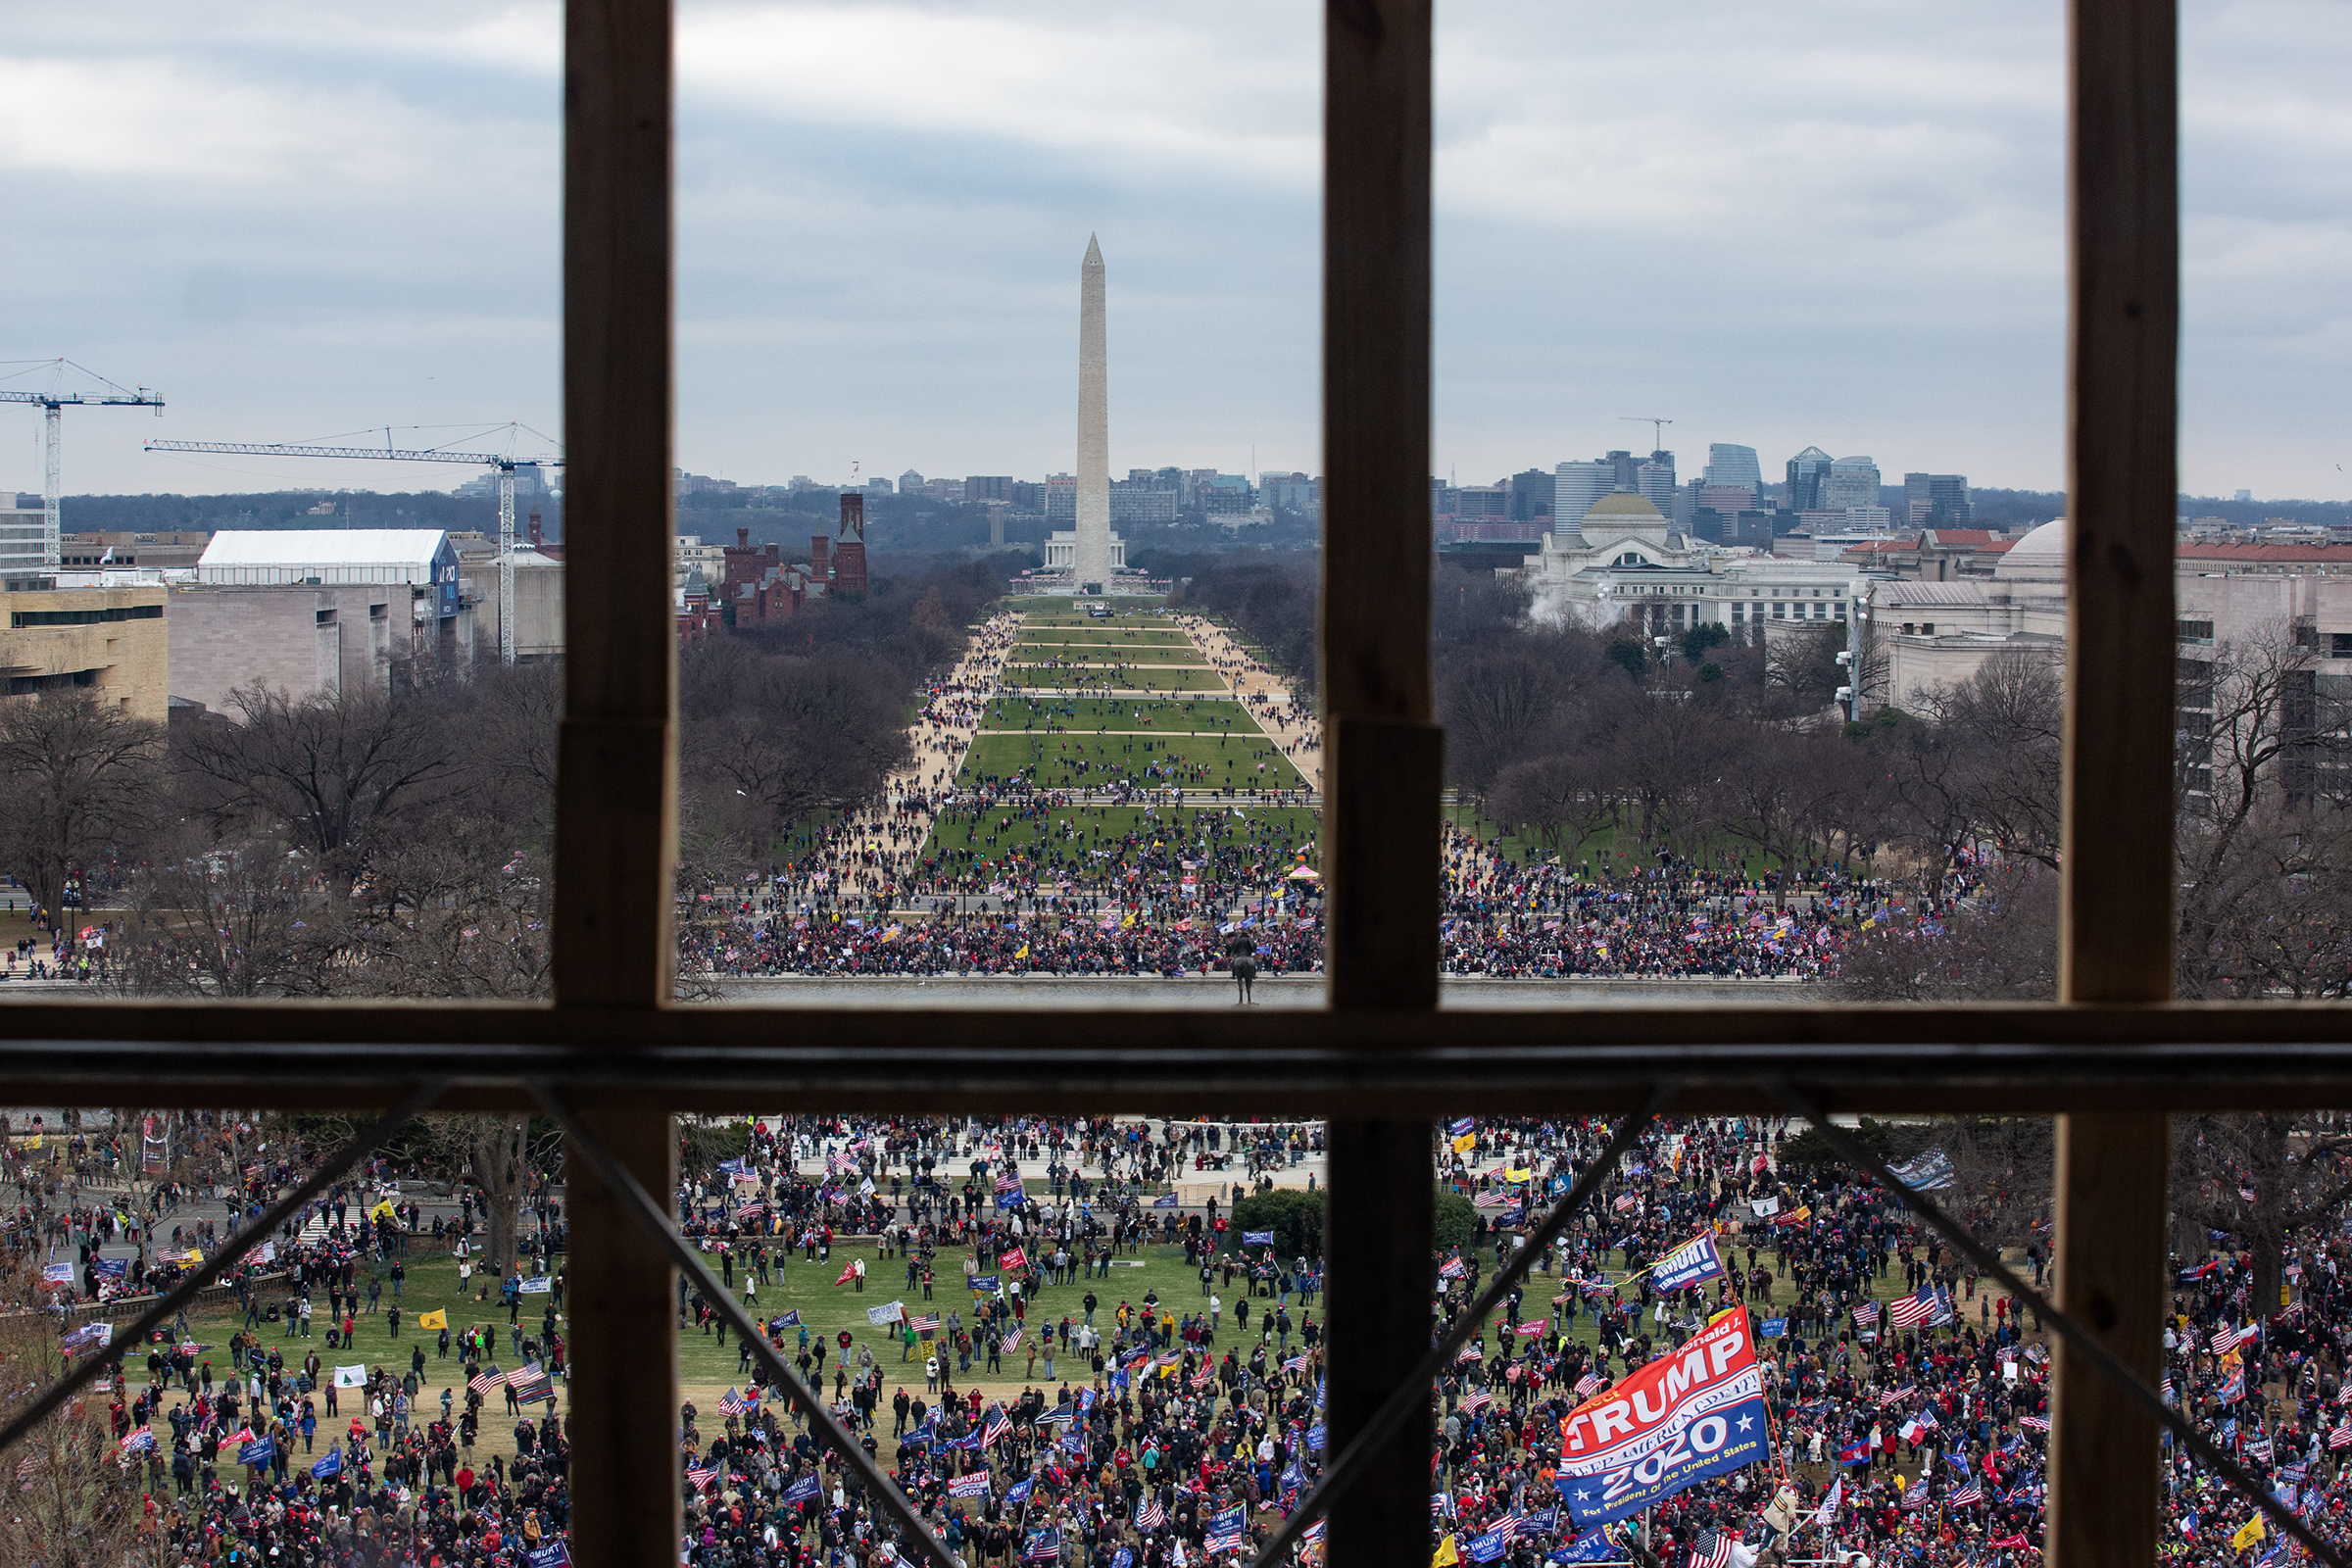 A crowd of Trump supporters gather outside as seen from inside the U.S. Capitol on January 6, 2021 in Washington, DC. (Cheriss May—Getty Images)